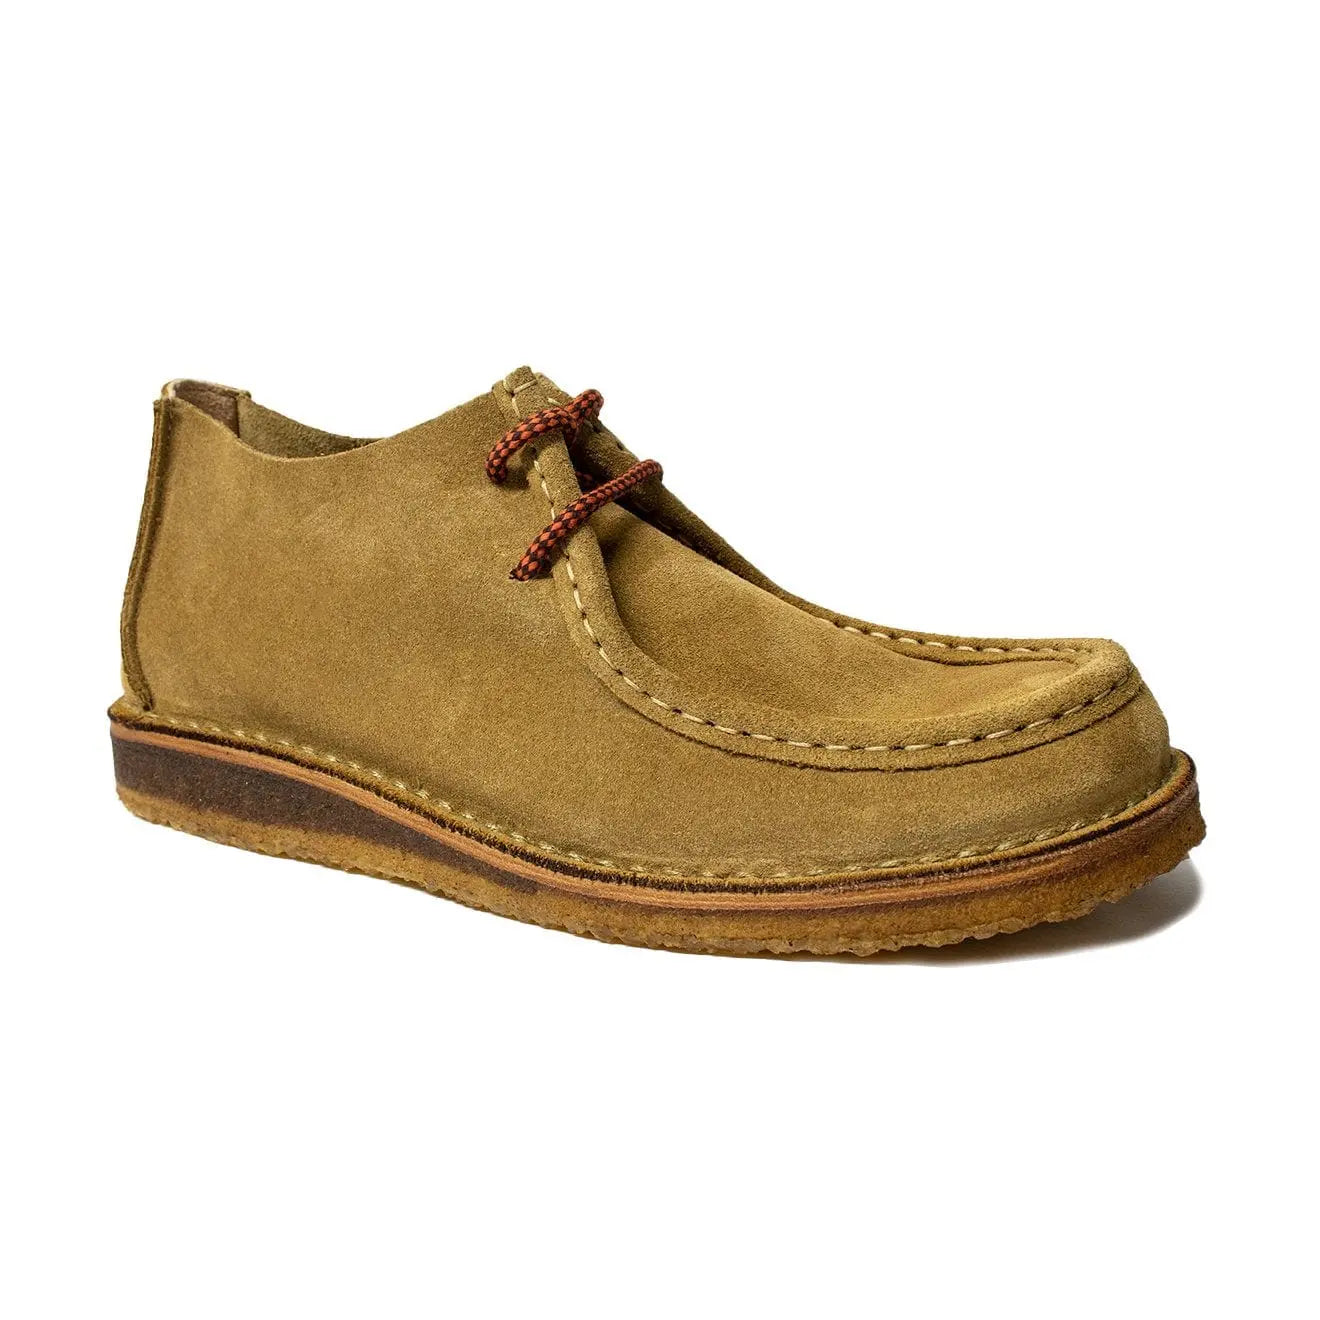 Astorflex Beenflex Shoes Whiskey | The Sporting Lodge